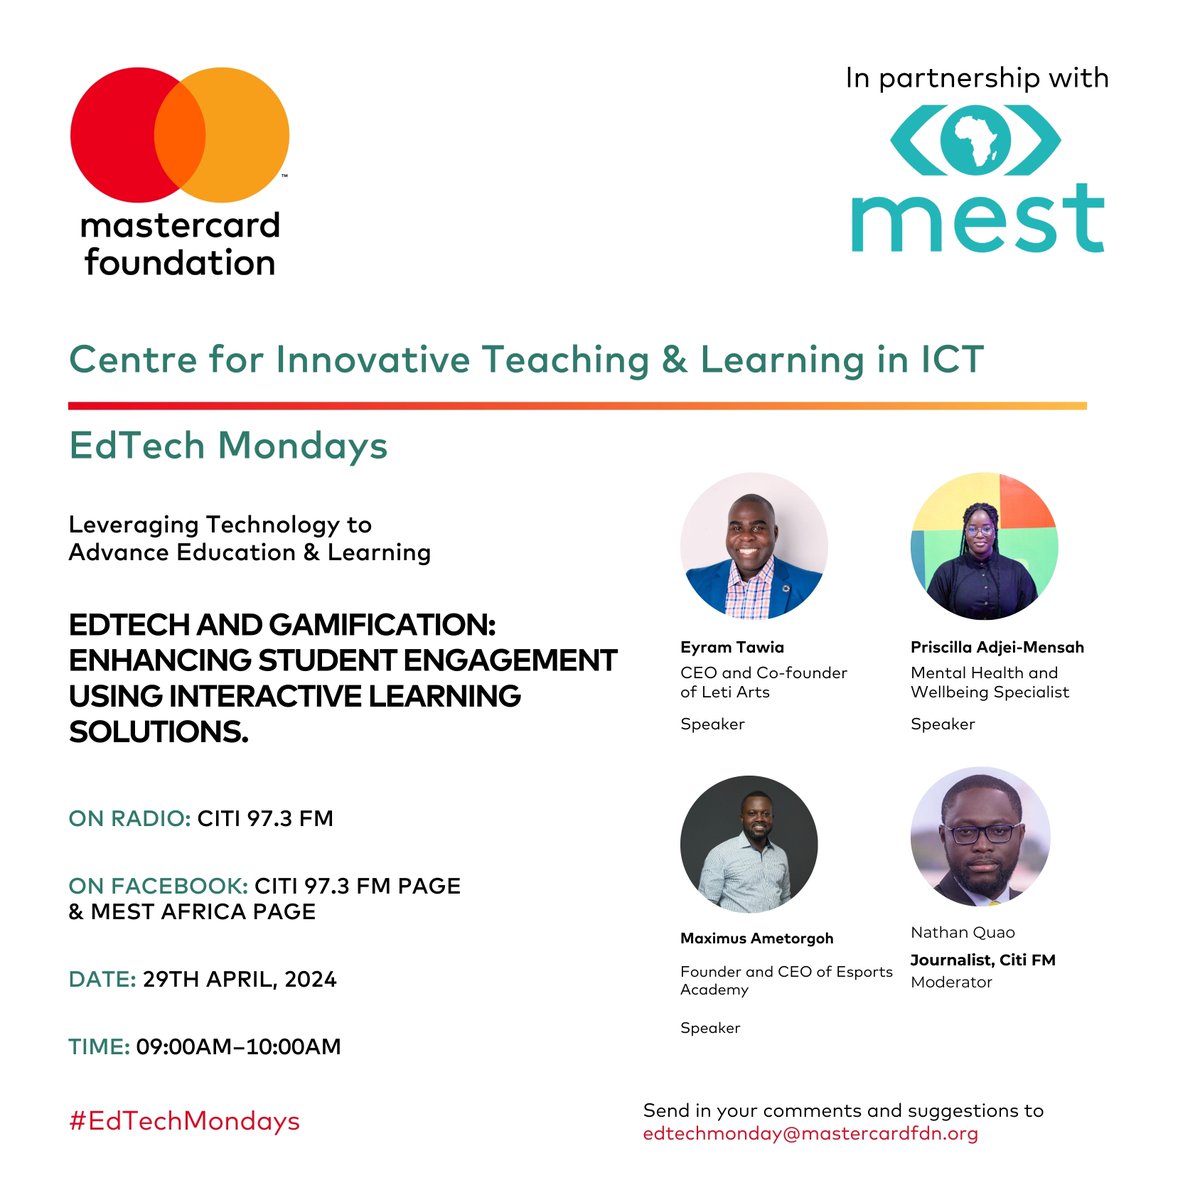 For this month's Ed-Tech Monday, we discuss the role gamification can play in improving learning outcomes, the ecosystems required to support it, and we also take a deep dive into the opportunities and challenges, as well as the system shifts needed for its success and